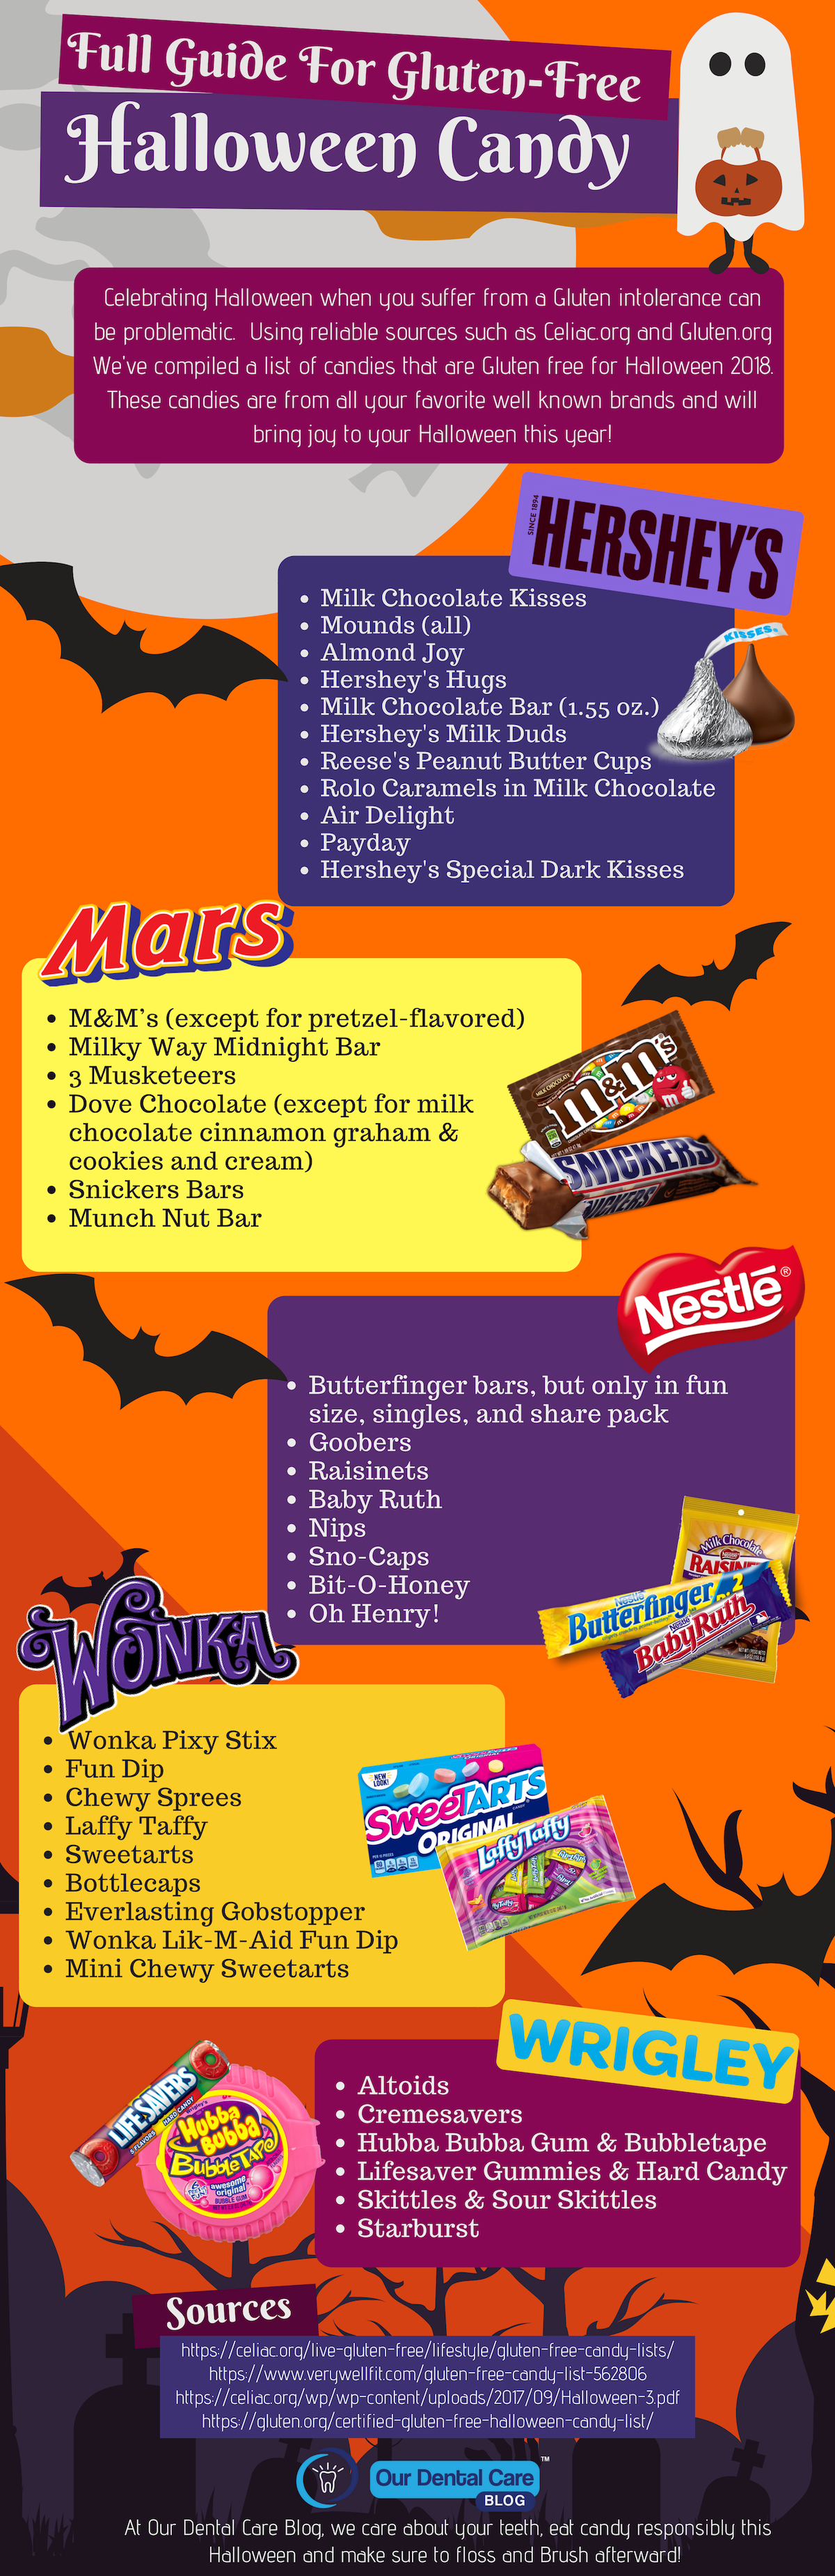 guide for gluten free halloween candy